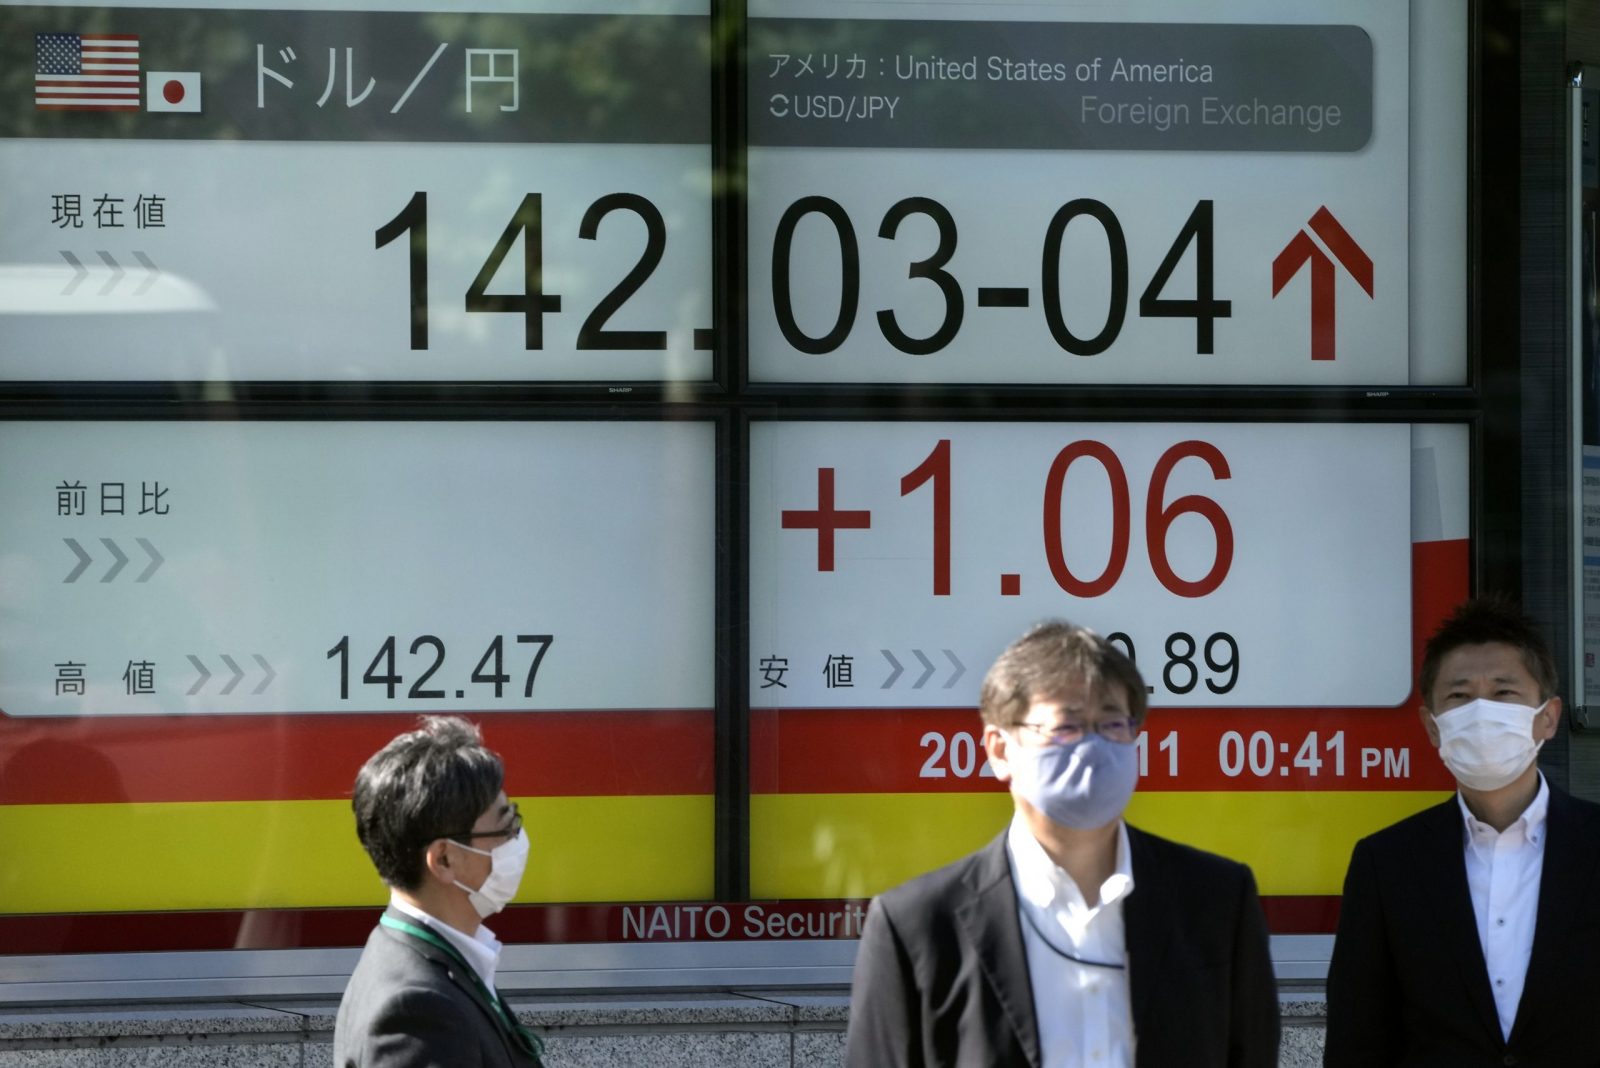 epa10299185 Pedestrians walk past a display showing the foreign exchange rate between the Japanese yen and US dollar in Tokyo, Japan, 11 November 2022. The Tokyo stock benchmark rose more than 750 points after the Wall Street surged in concern over the US Federal Reserve's interest rate hikes. The Japanese yen has risen from 146 low level on 10 November to 141 higher level.  EPA/KIMIMASA MAYAMA